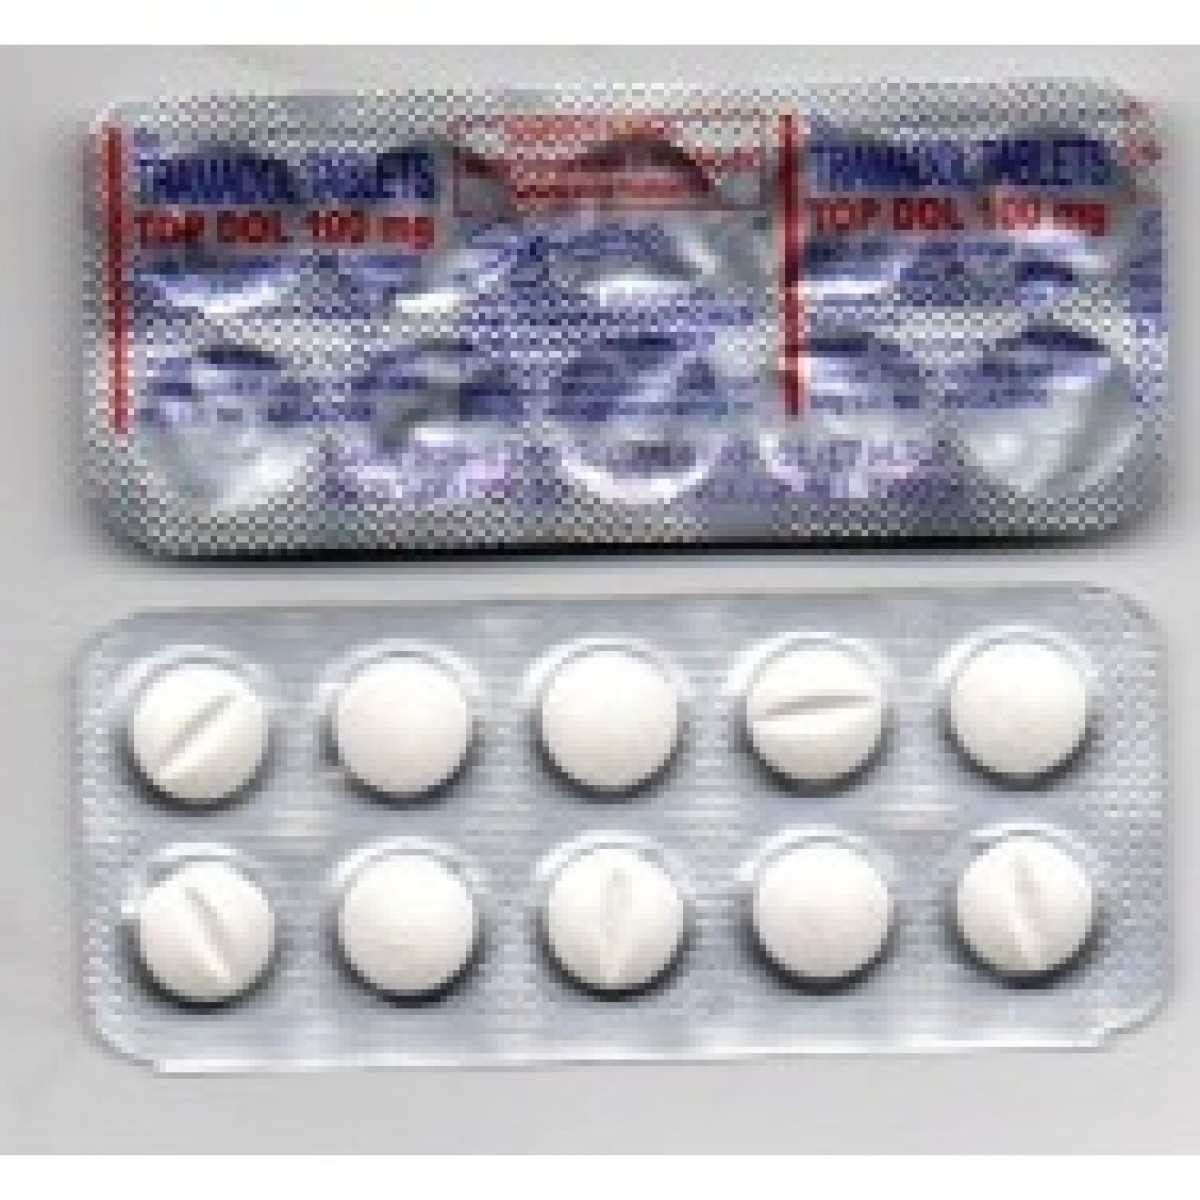 tramadol hcl 100 mg tablet picture frame